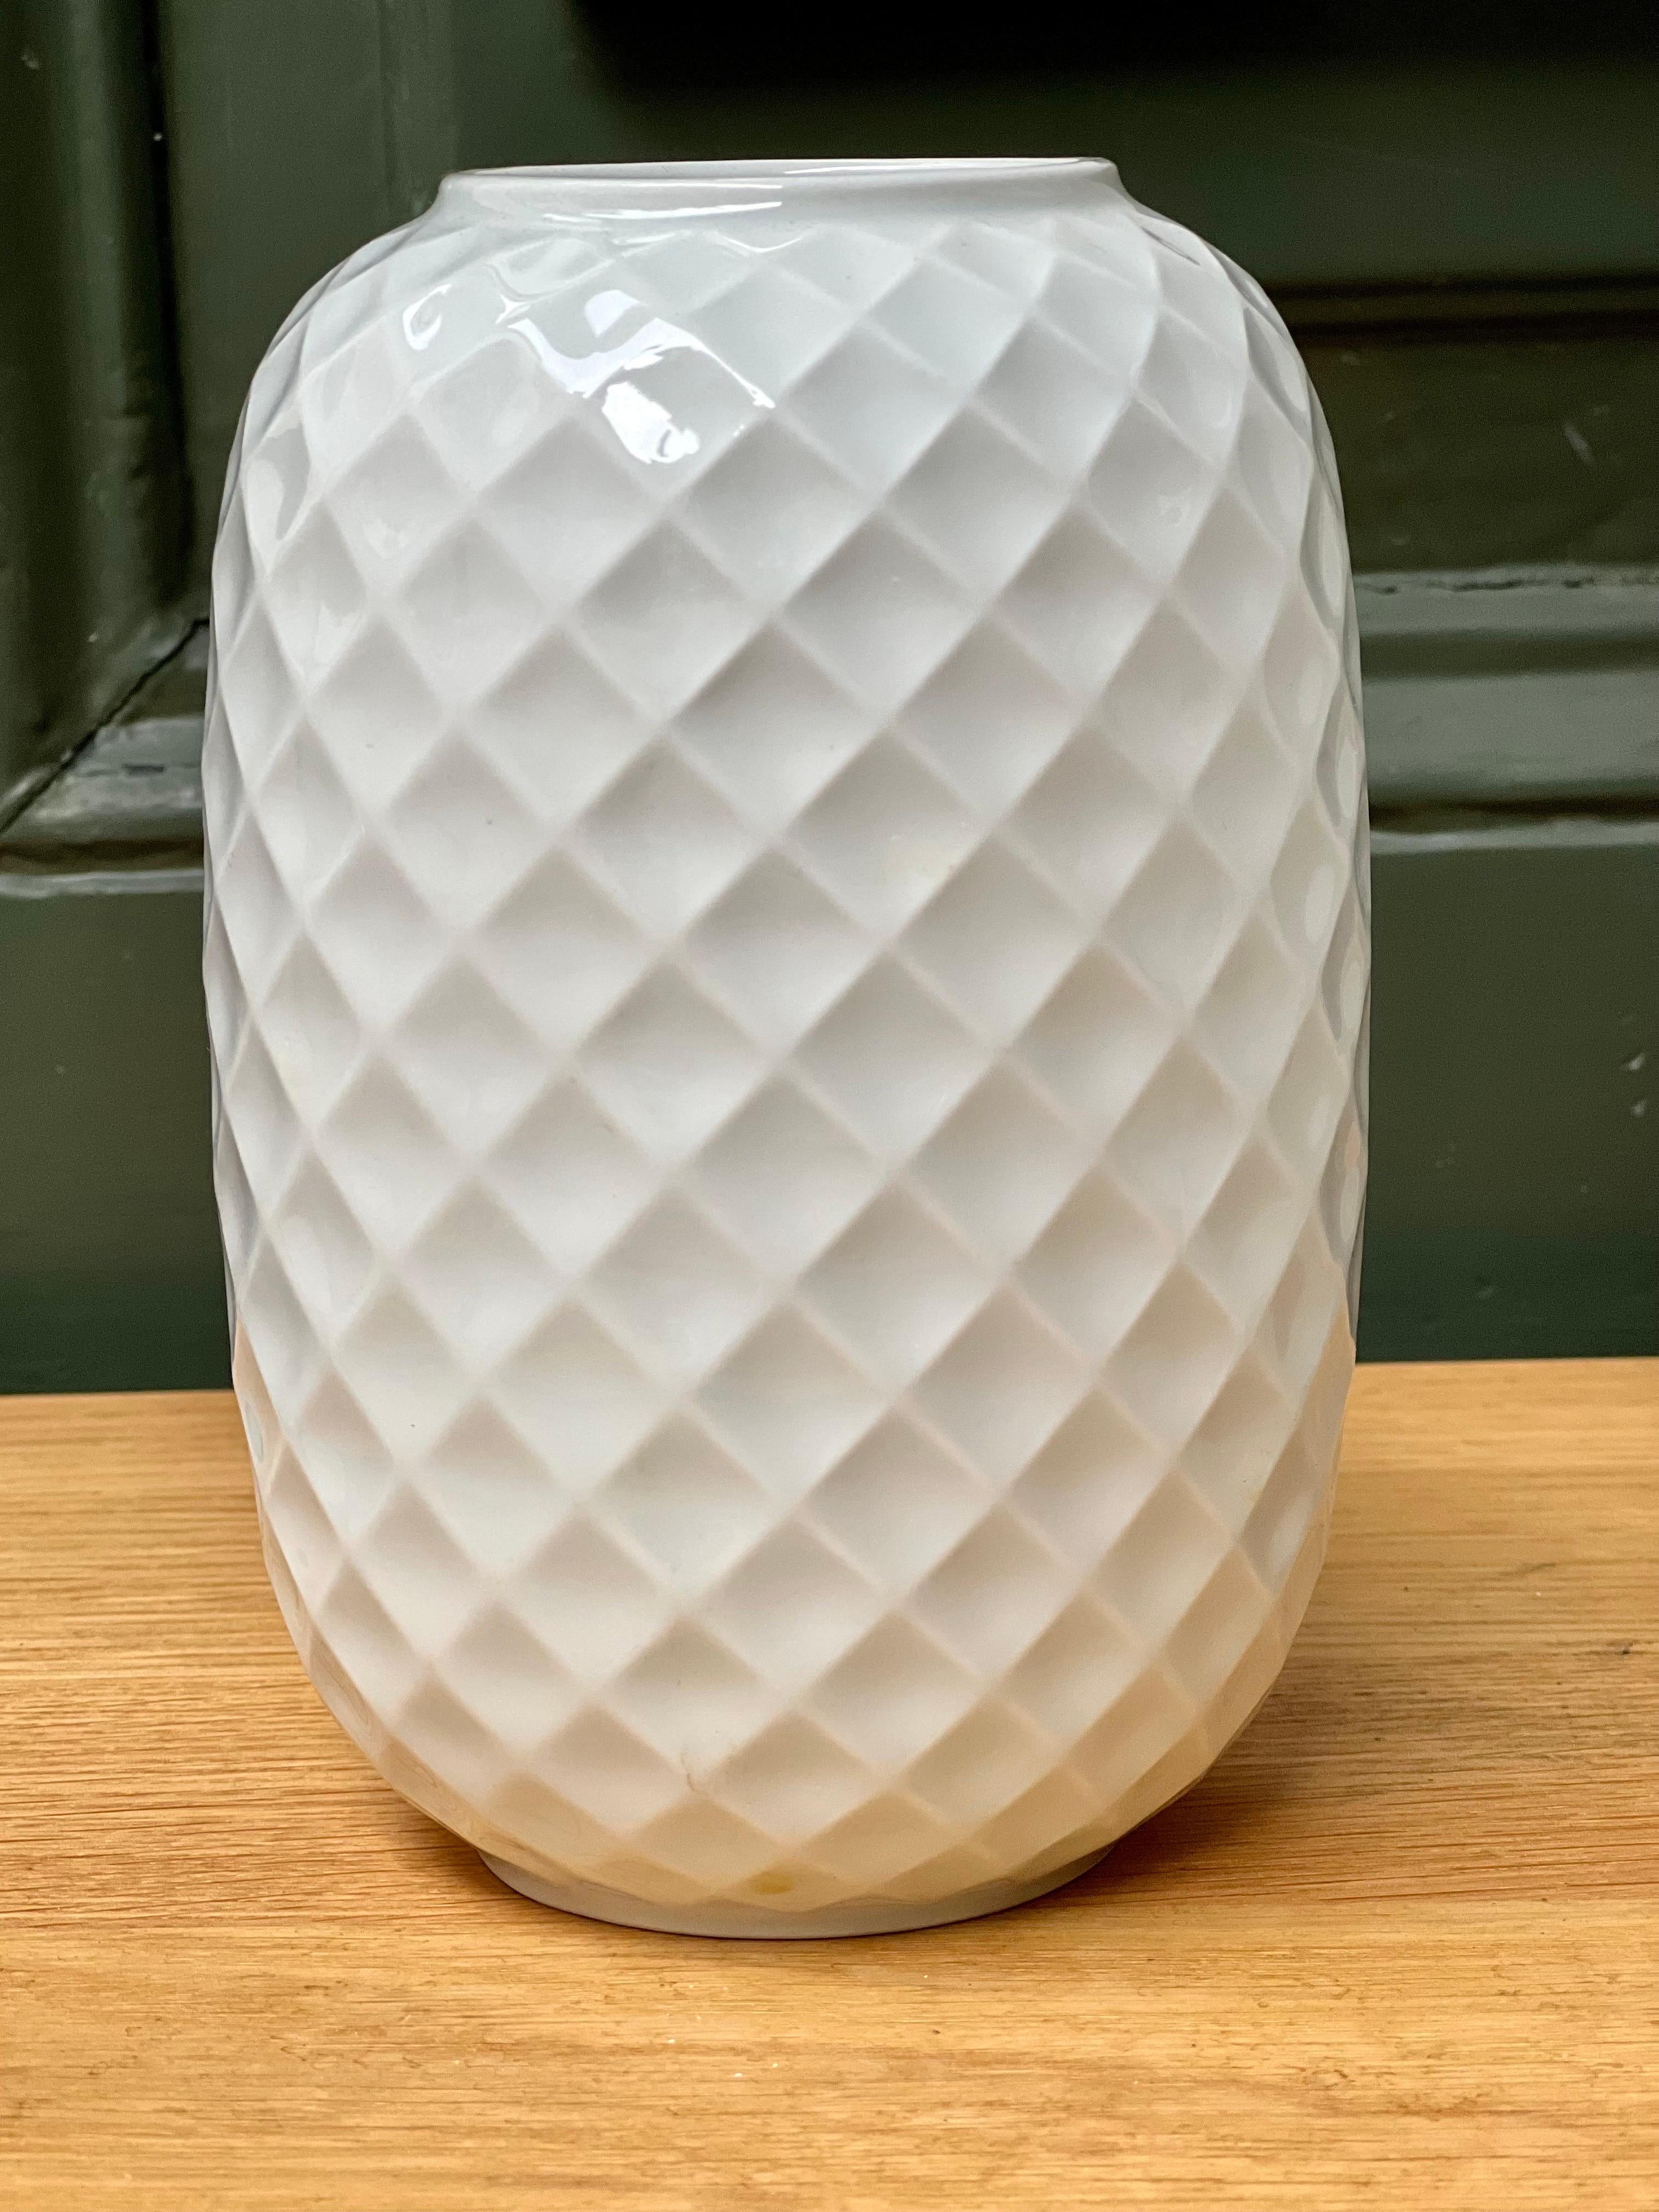 Set of 4 Holiday Vases, White Honeycomb Relief., Porcelain, Thomas/Germany 1960 For Sale 4